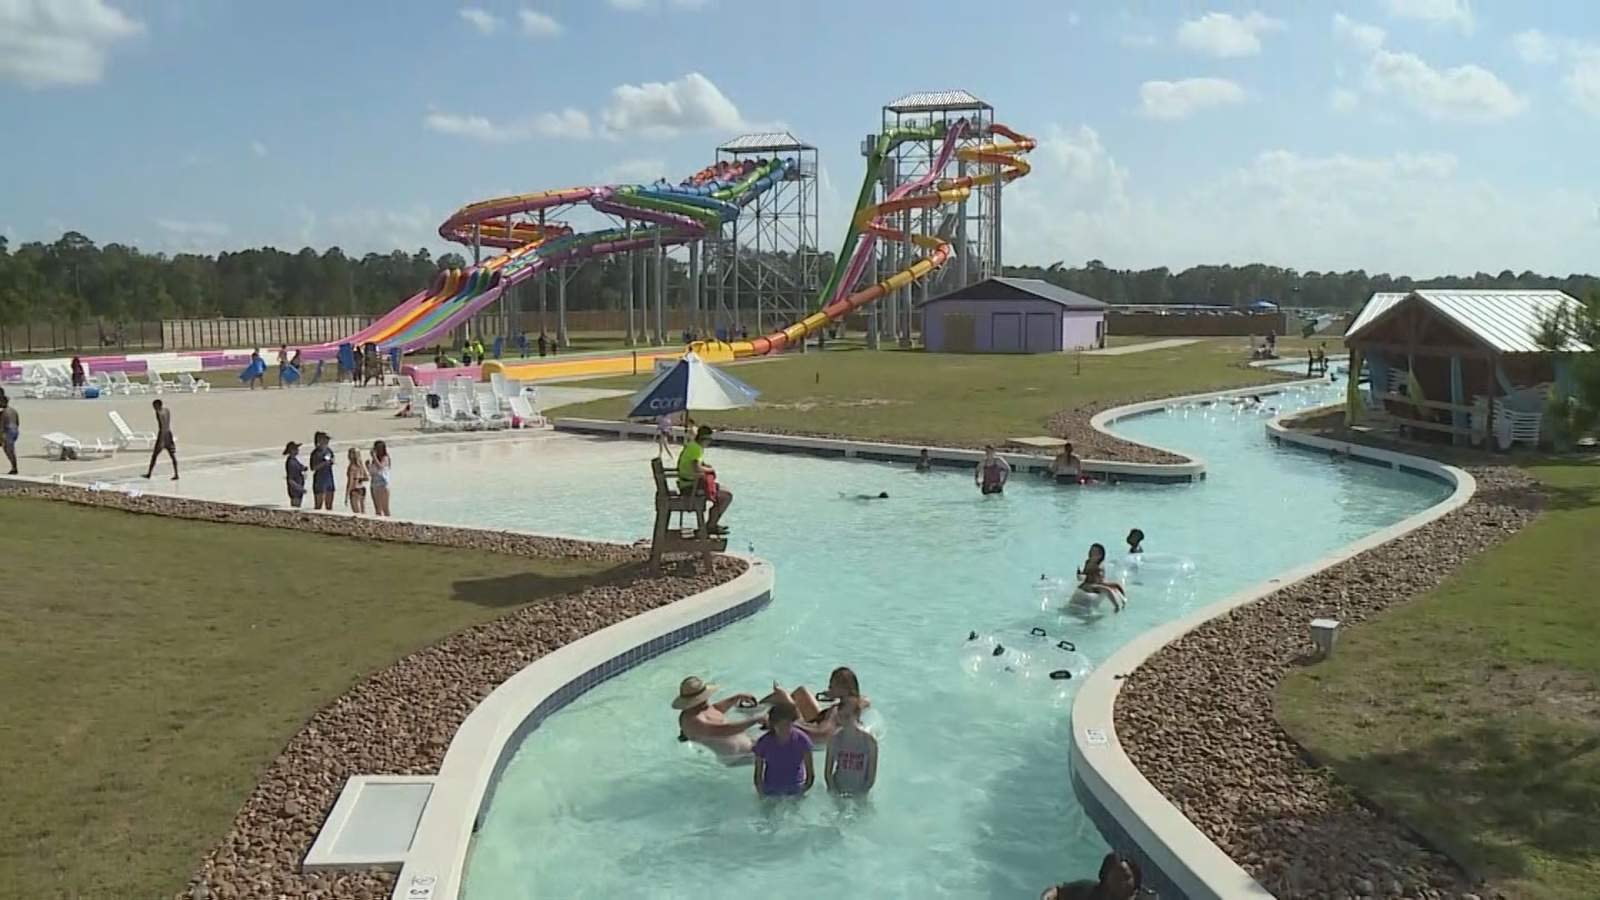 Thousands flock to Houston-area water park as CEO defies Gov. Abbott’s orders and reopens for Memorial Day weekend